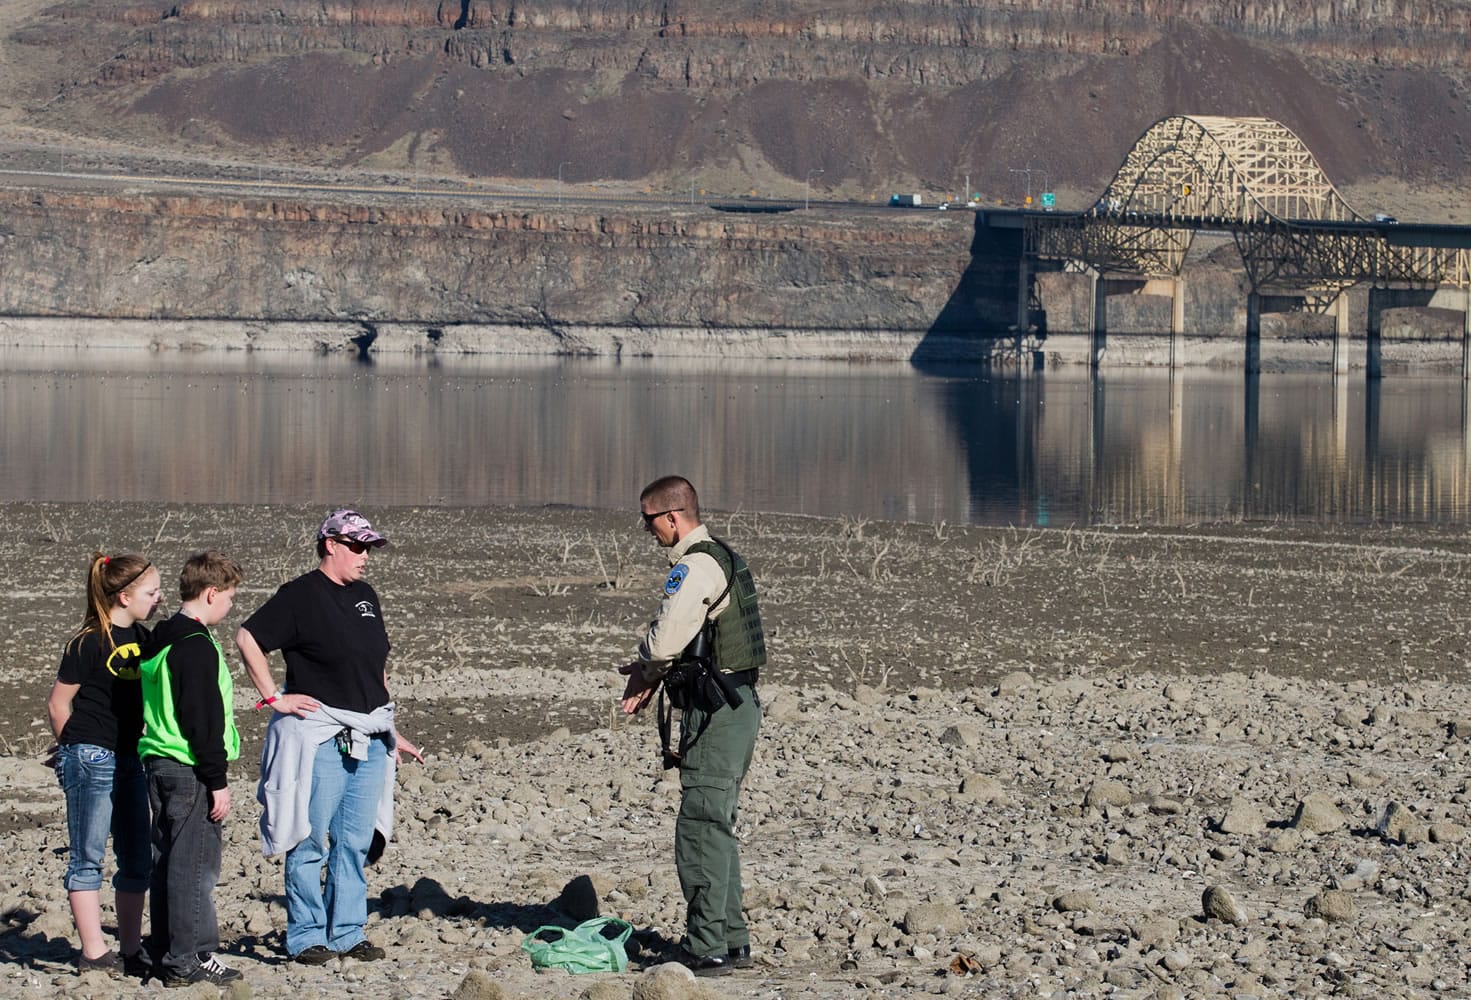 Washington State Department of Fish &amp; Wildlife officer Will Smith warns Talena Hunter of Ellensburg, and her two children, to stay off the exposed beach area along the Columbia River on Wednesday.